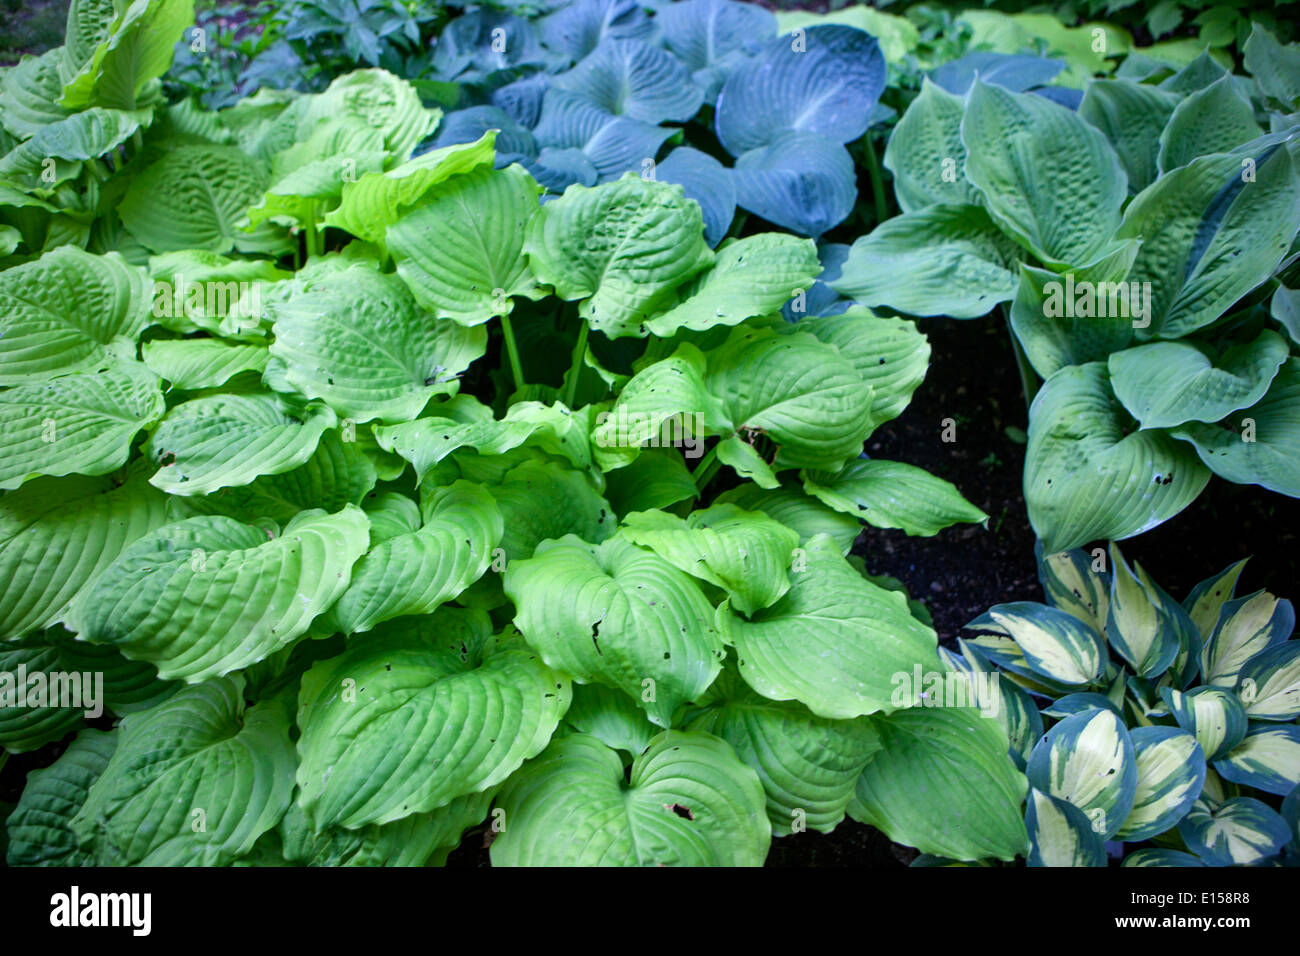 Hostas garden, plants for the shady parts of the garden, hostas in garden, scenic view of different hostas, fresh new leaves in may Stock Photo